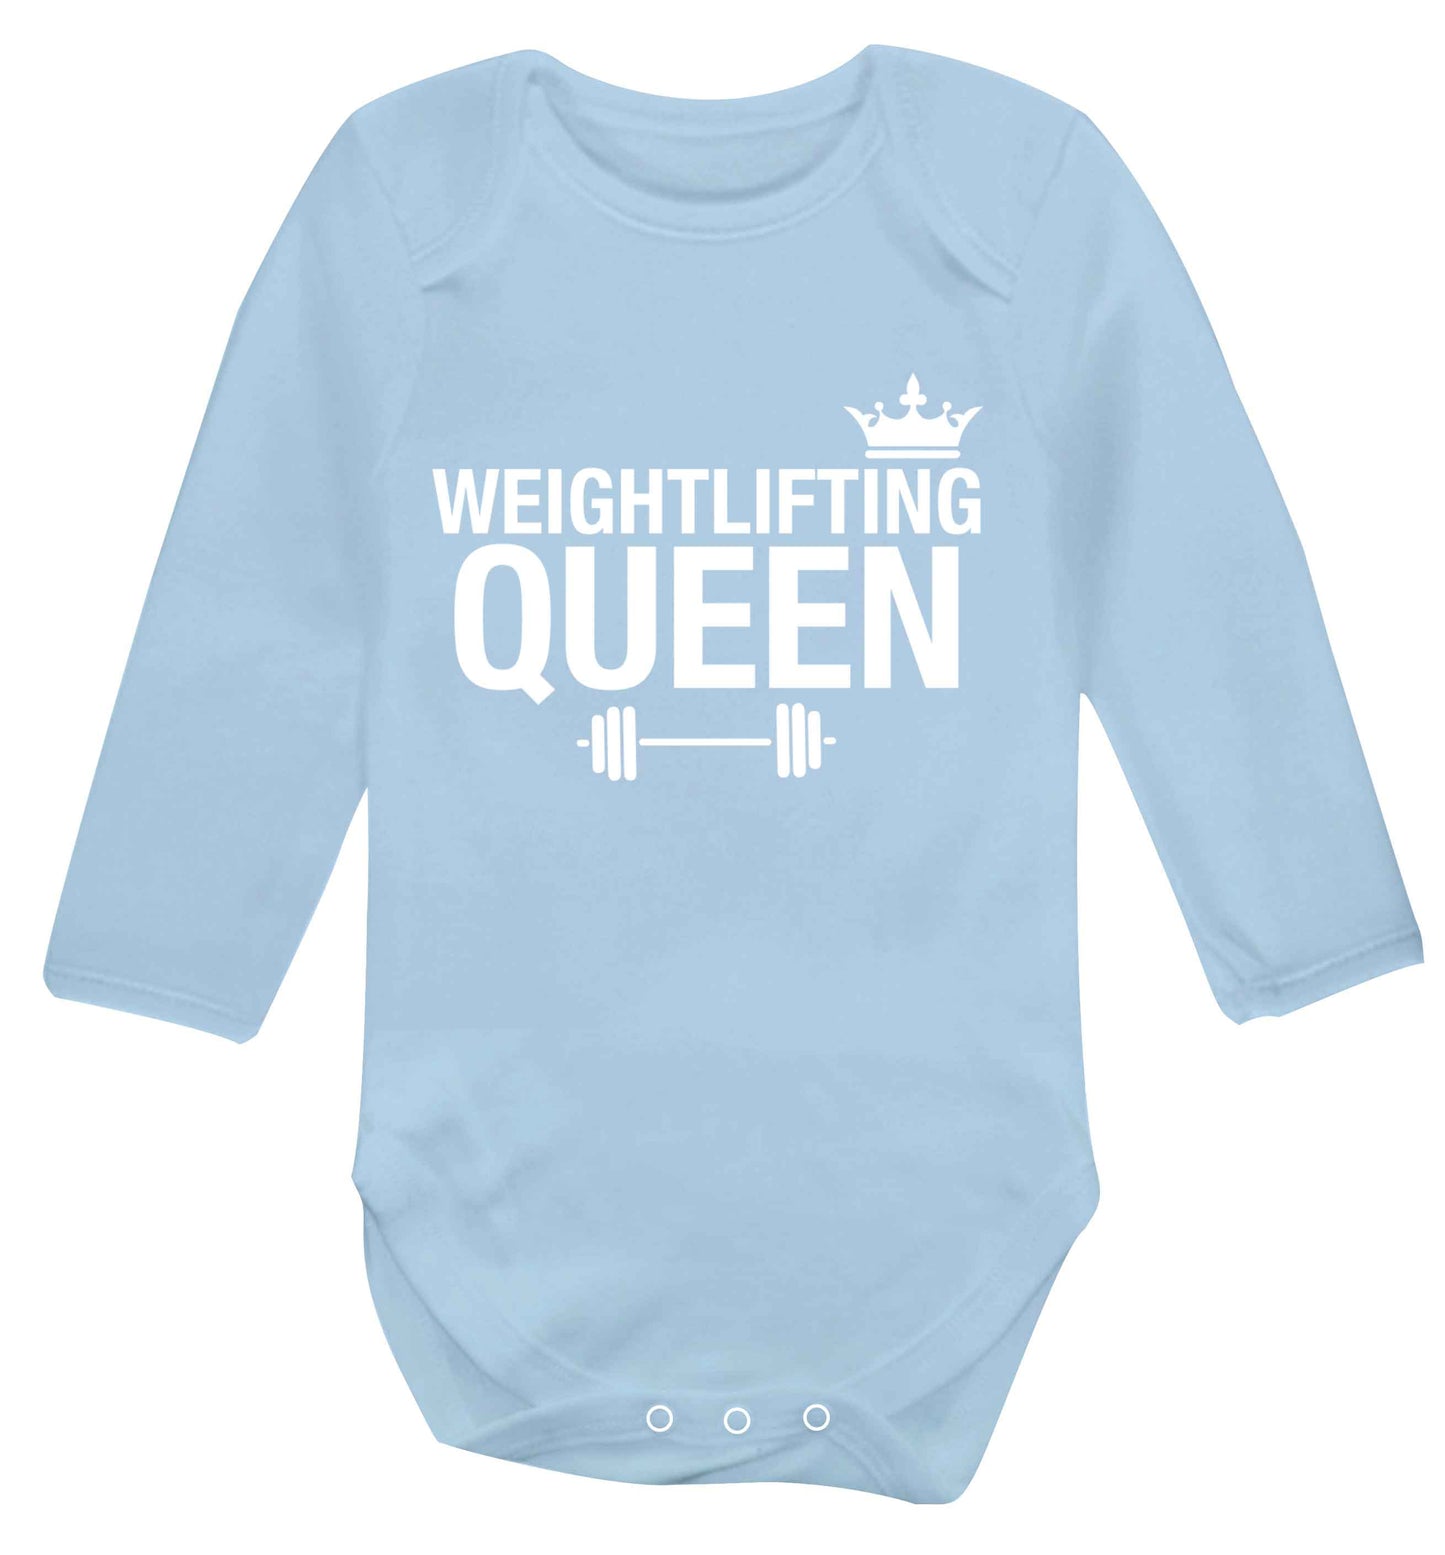 Weightlifting Queen Baby Vest long sleeved pale blue 6-12 months